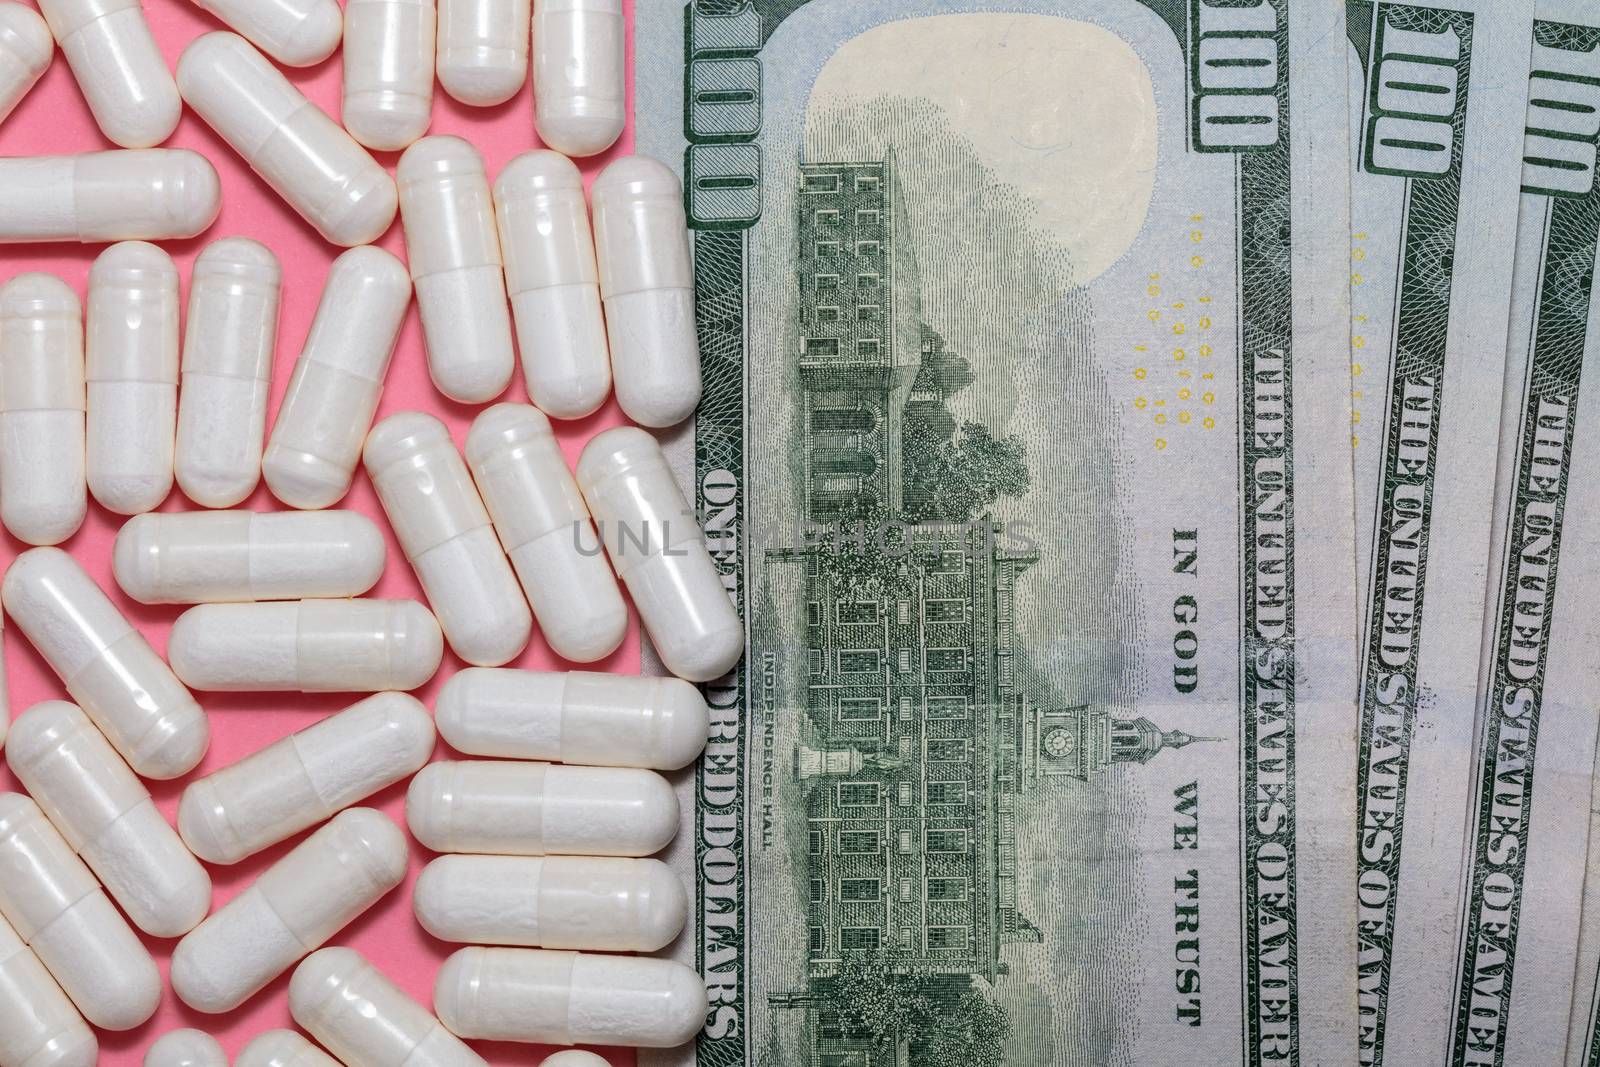 Top close up shot of white pills and a few hundreed dollar bills next to them on pink background. Healthcare, medical, pharmaceutical business, commerce, shopping concepts. New normal concept. by DamantisZ